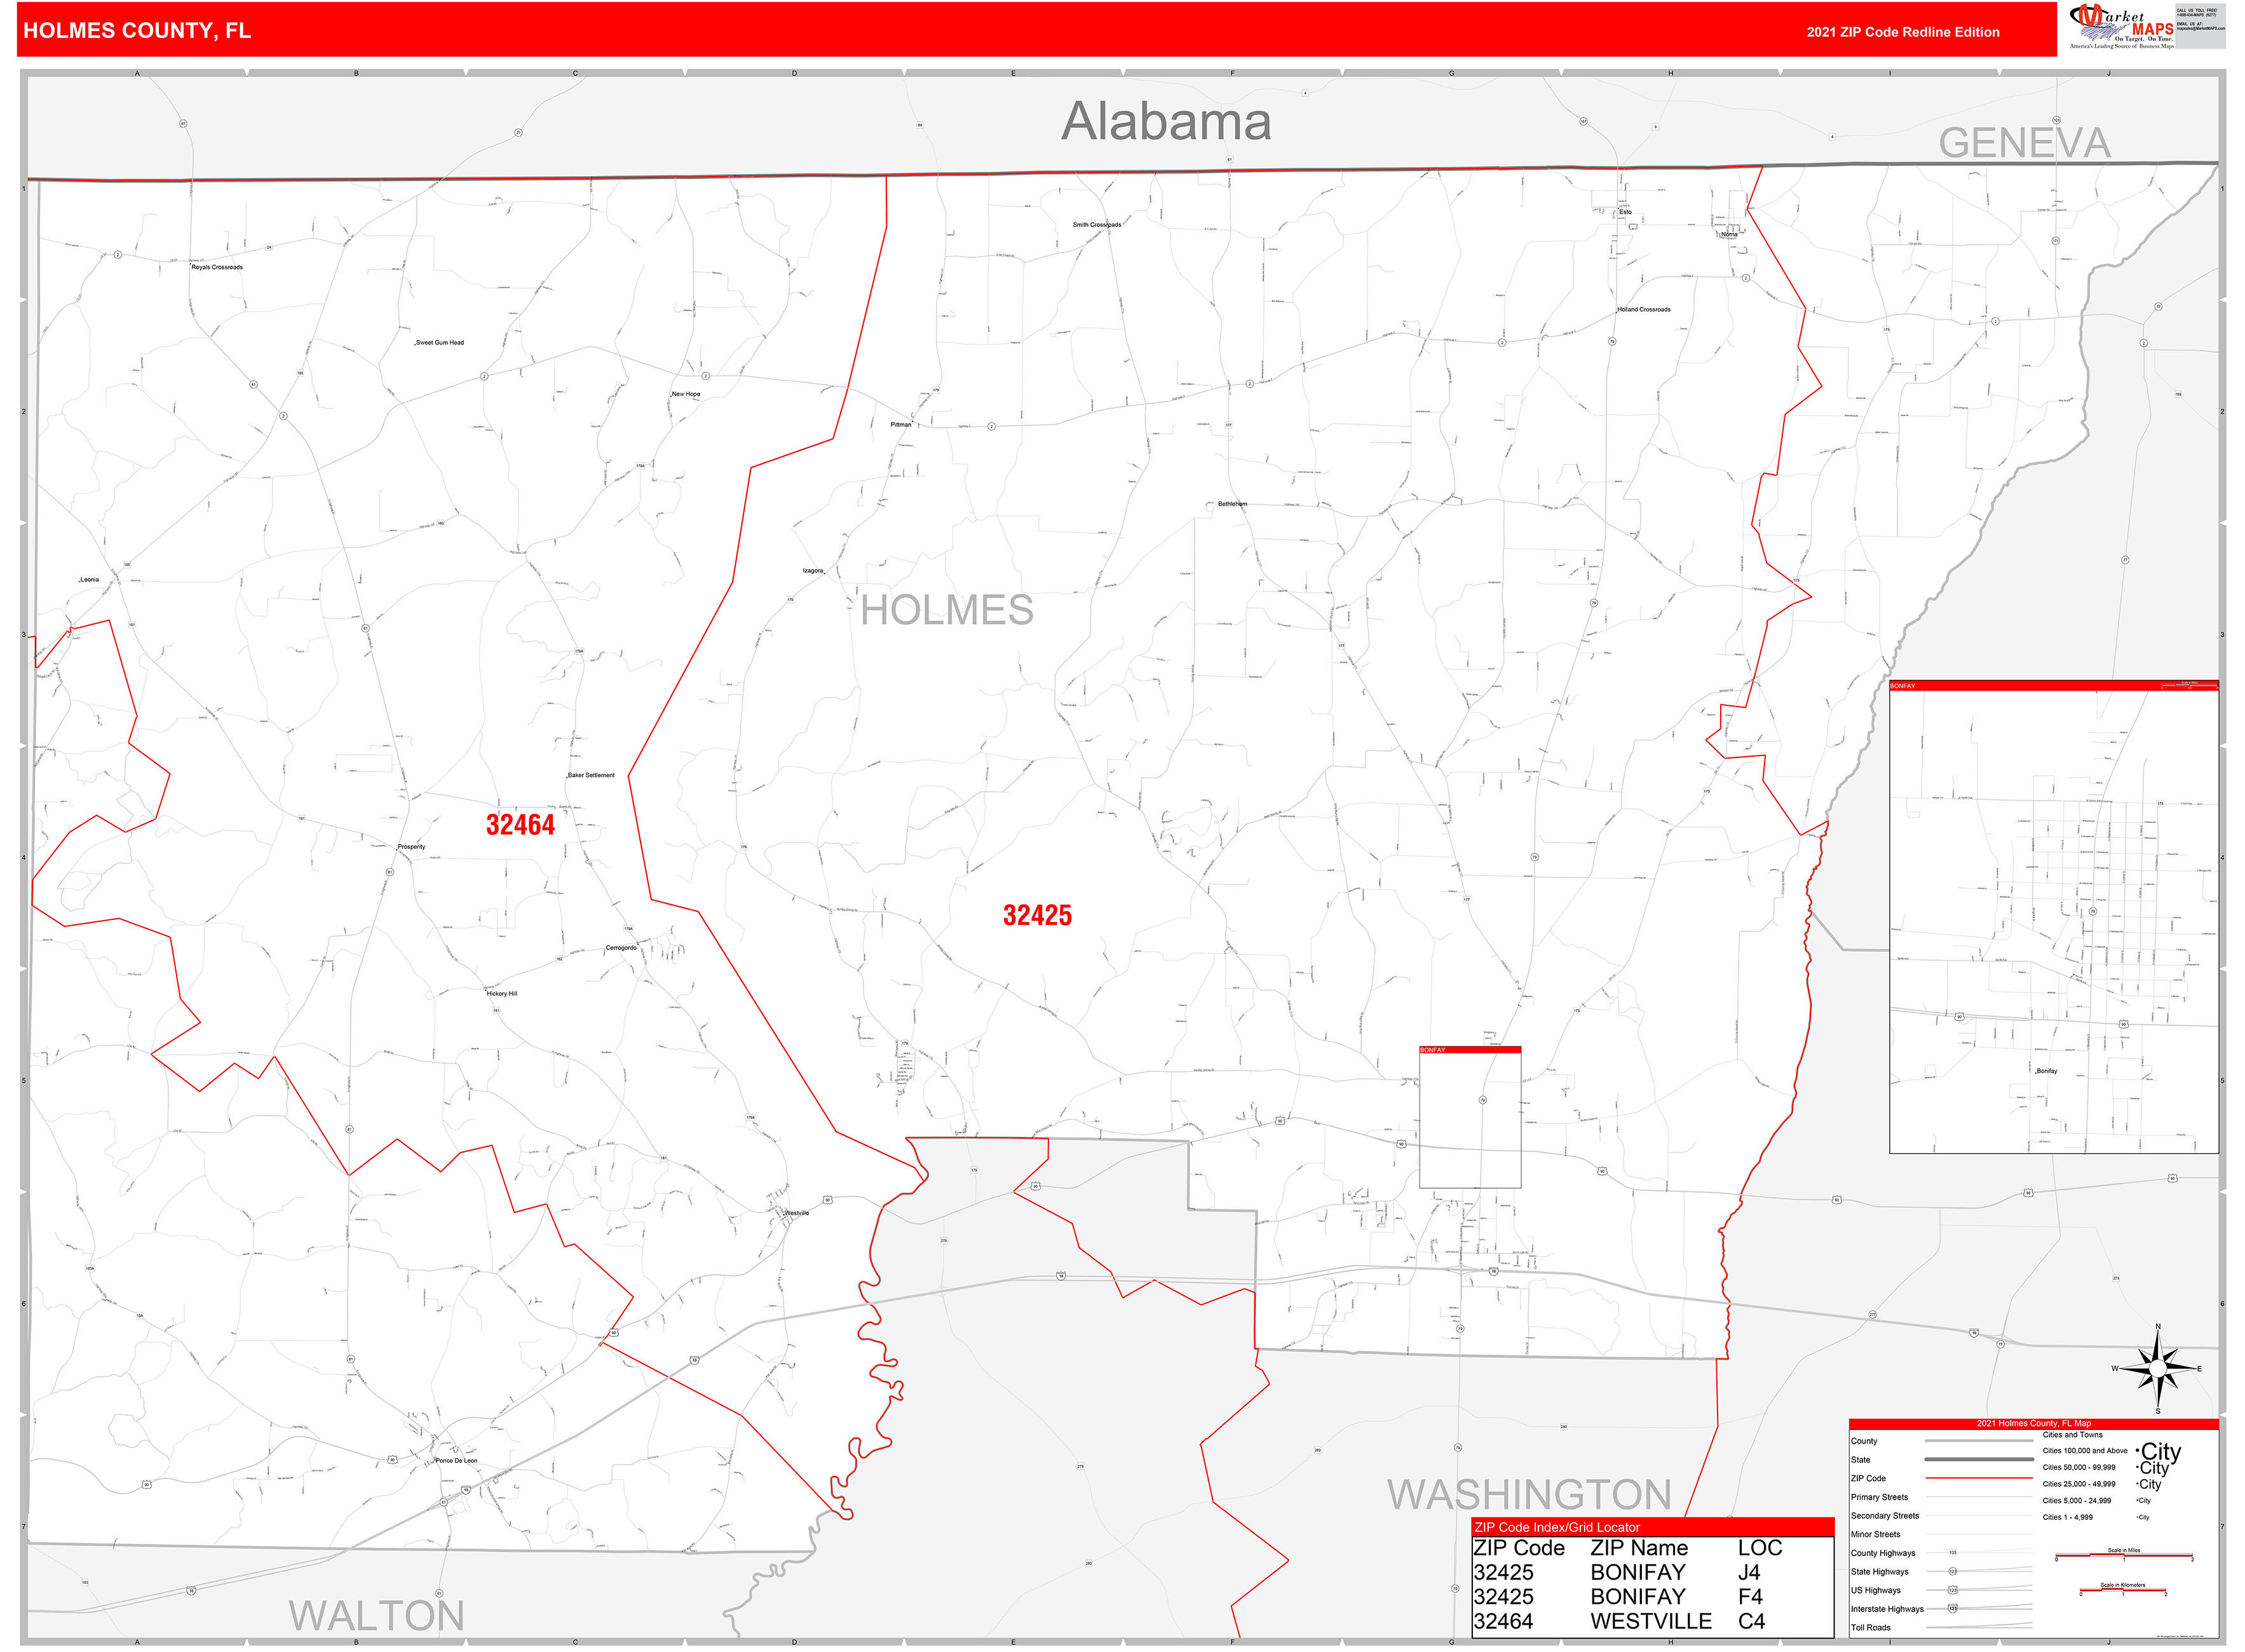 Holmes County, FL Zip Code Wall Map Red Line Style by MarketMAPS - MapSales